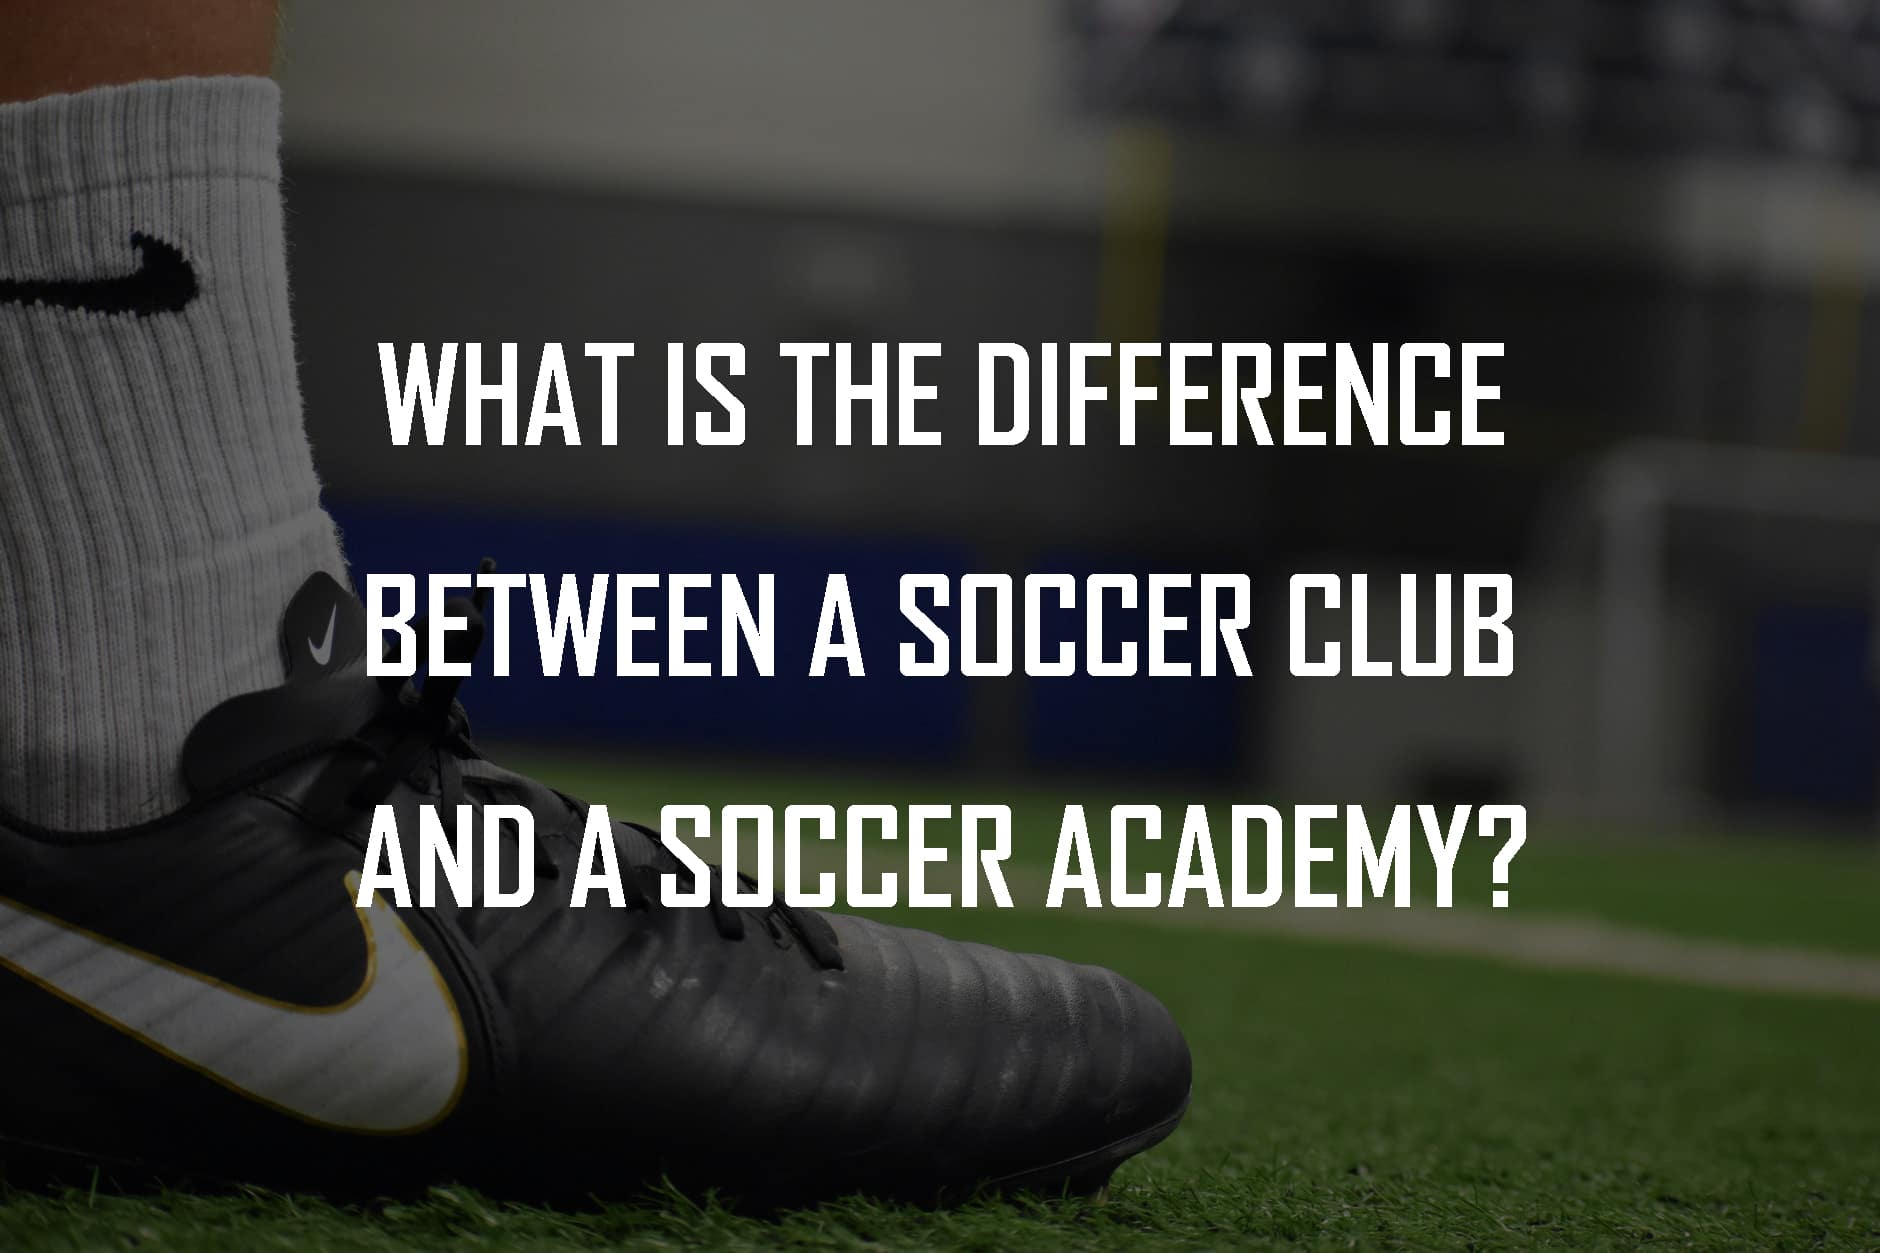 What is the difference between a soccer club and a soccer academy?